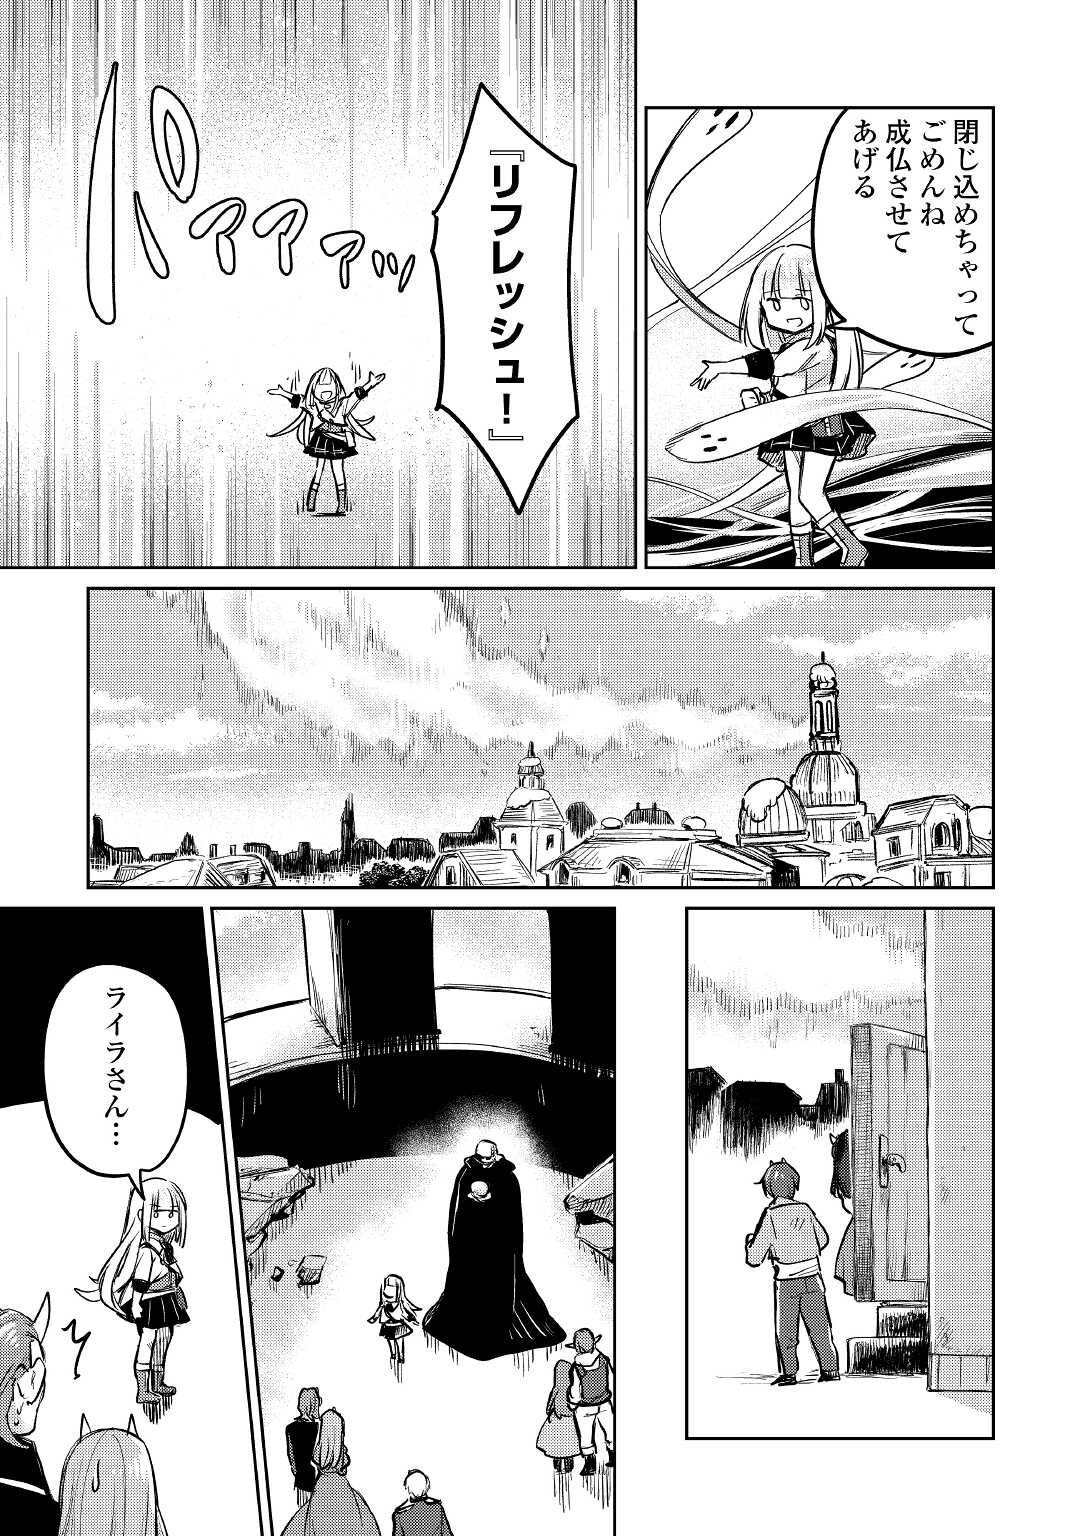 The Former Structural Researcher’s Story of Otherworldly Adventure 第40話 - Page 15